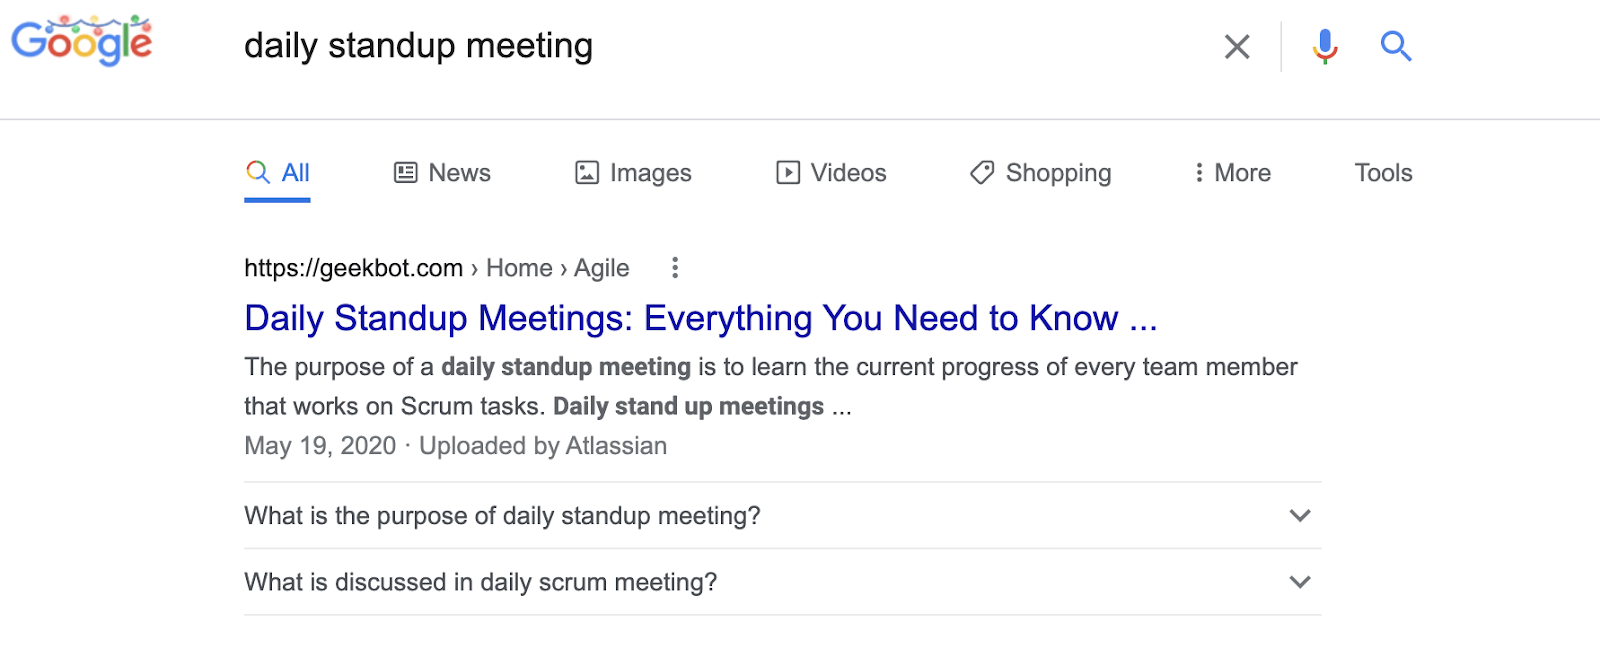 Google search result position #1 for "daily standup meeting".